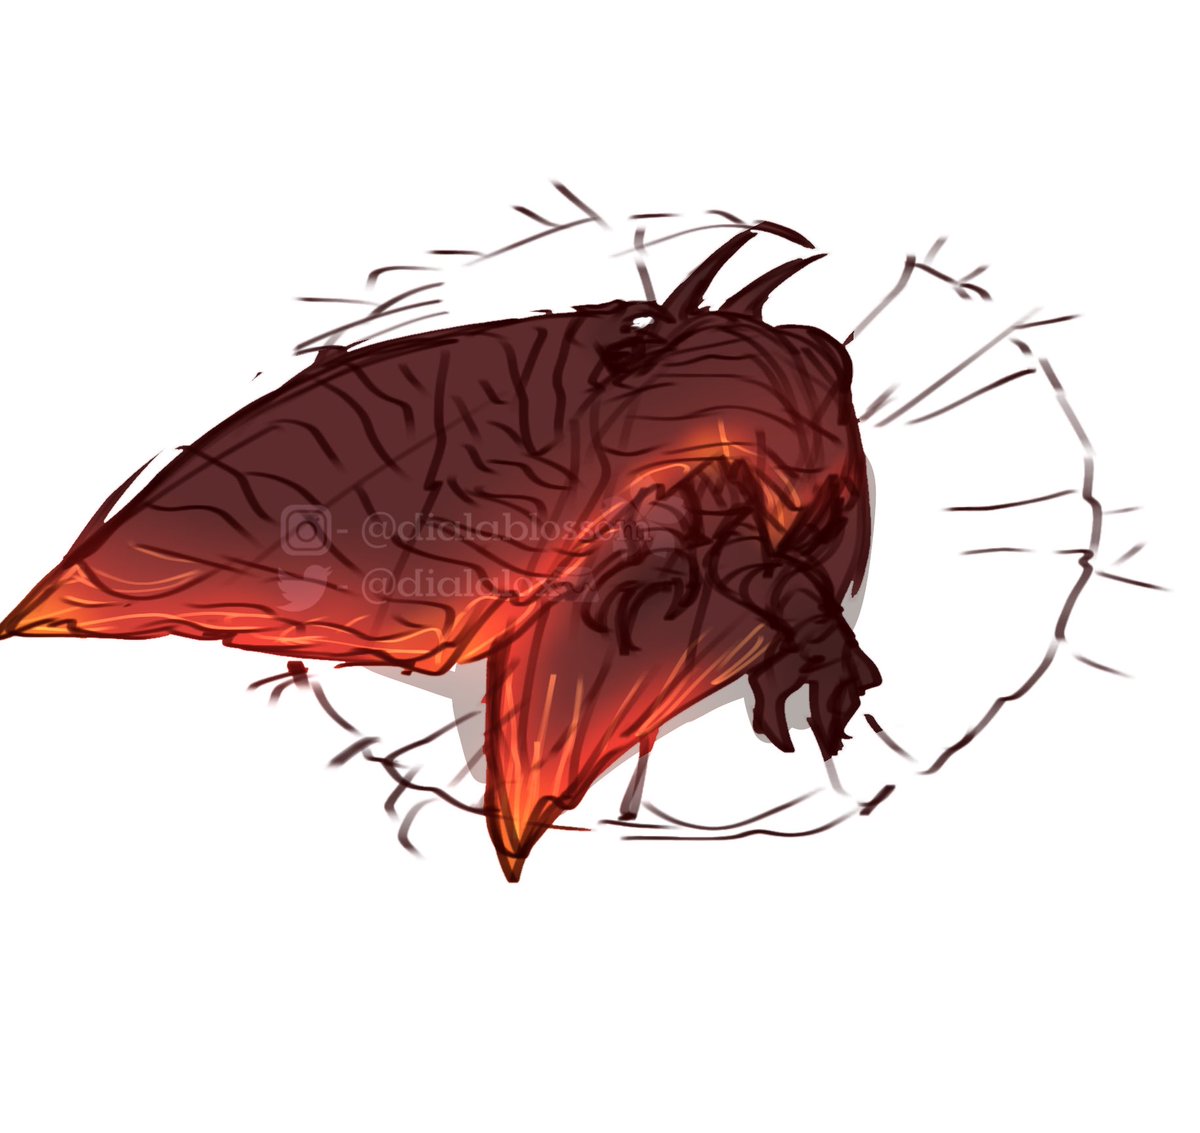 I’ll gone for a few hours gotta do my hair so have a rodan doodle I did a few weeks ago for now